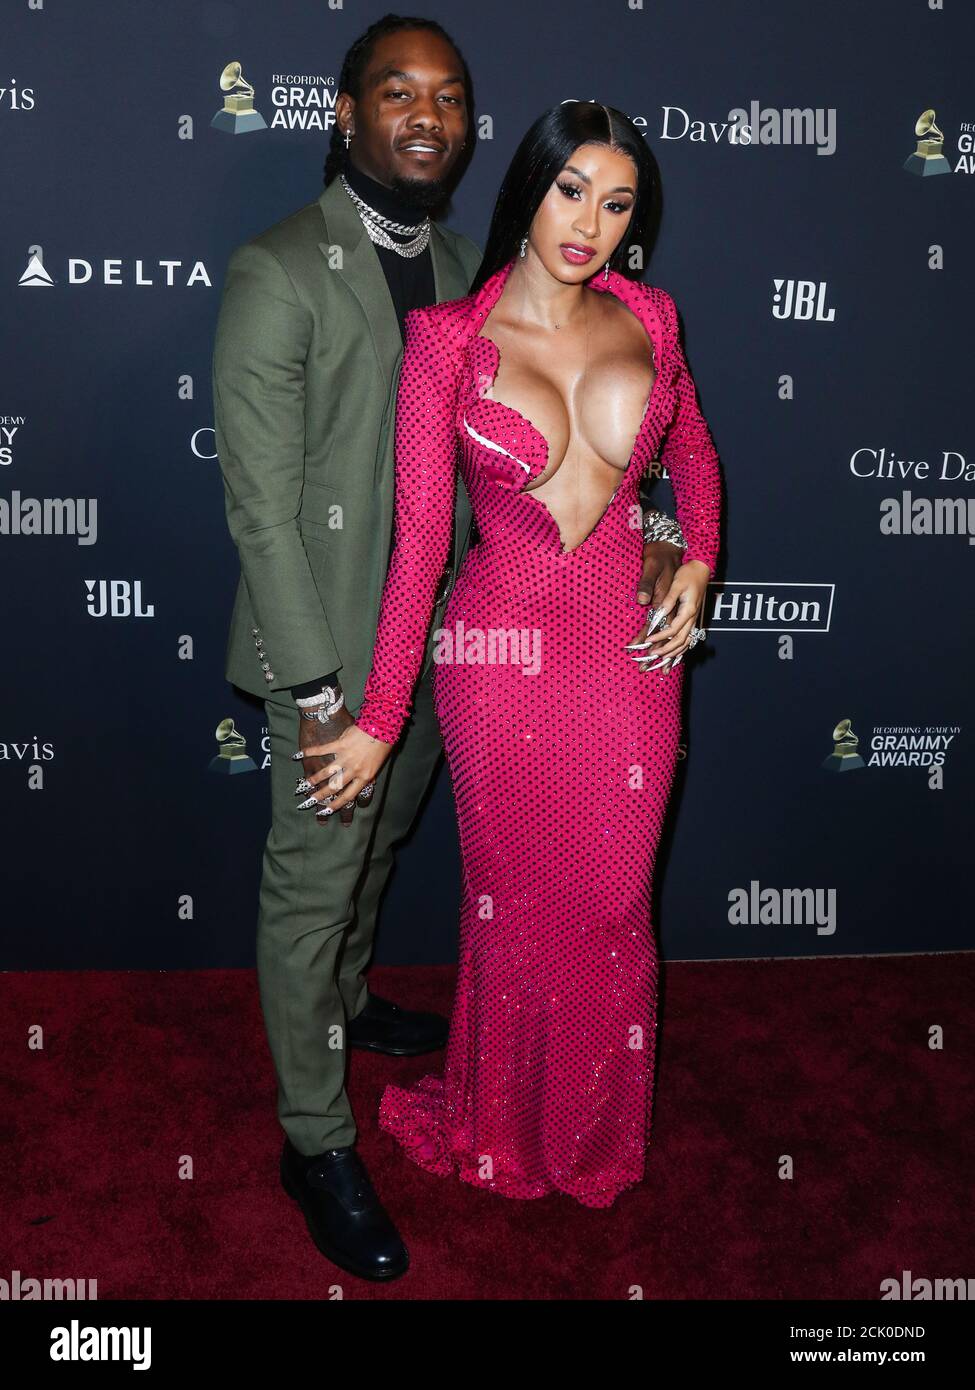 Beverly Hills, United States. 15th Sep, 2020. (FILE) Cardi B Files for Divorce from Offset After 3 Years of Marriage. BEVERLY HILLS, LOS ANGELES, CALIFORNIA, USA - JANUARY 25: Rapper Offset (Kiari Kendrell Cephus) and wife/rapper Cardi B (Belcalis Marlenis Almanzar) arrive at The Recording Academy And Clive Davis' 2020 Pre-GRAMMY Gala held at The Beverly Hilton Hotel on January 25, 2020 in Beverly Hills, Los Angeles, California, United States. (Photo by Xavier Collin/Image Press Agency) Credit: Image Press Agency/Alamy Live News Stock Photo